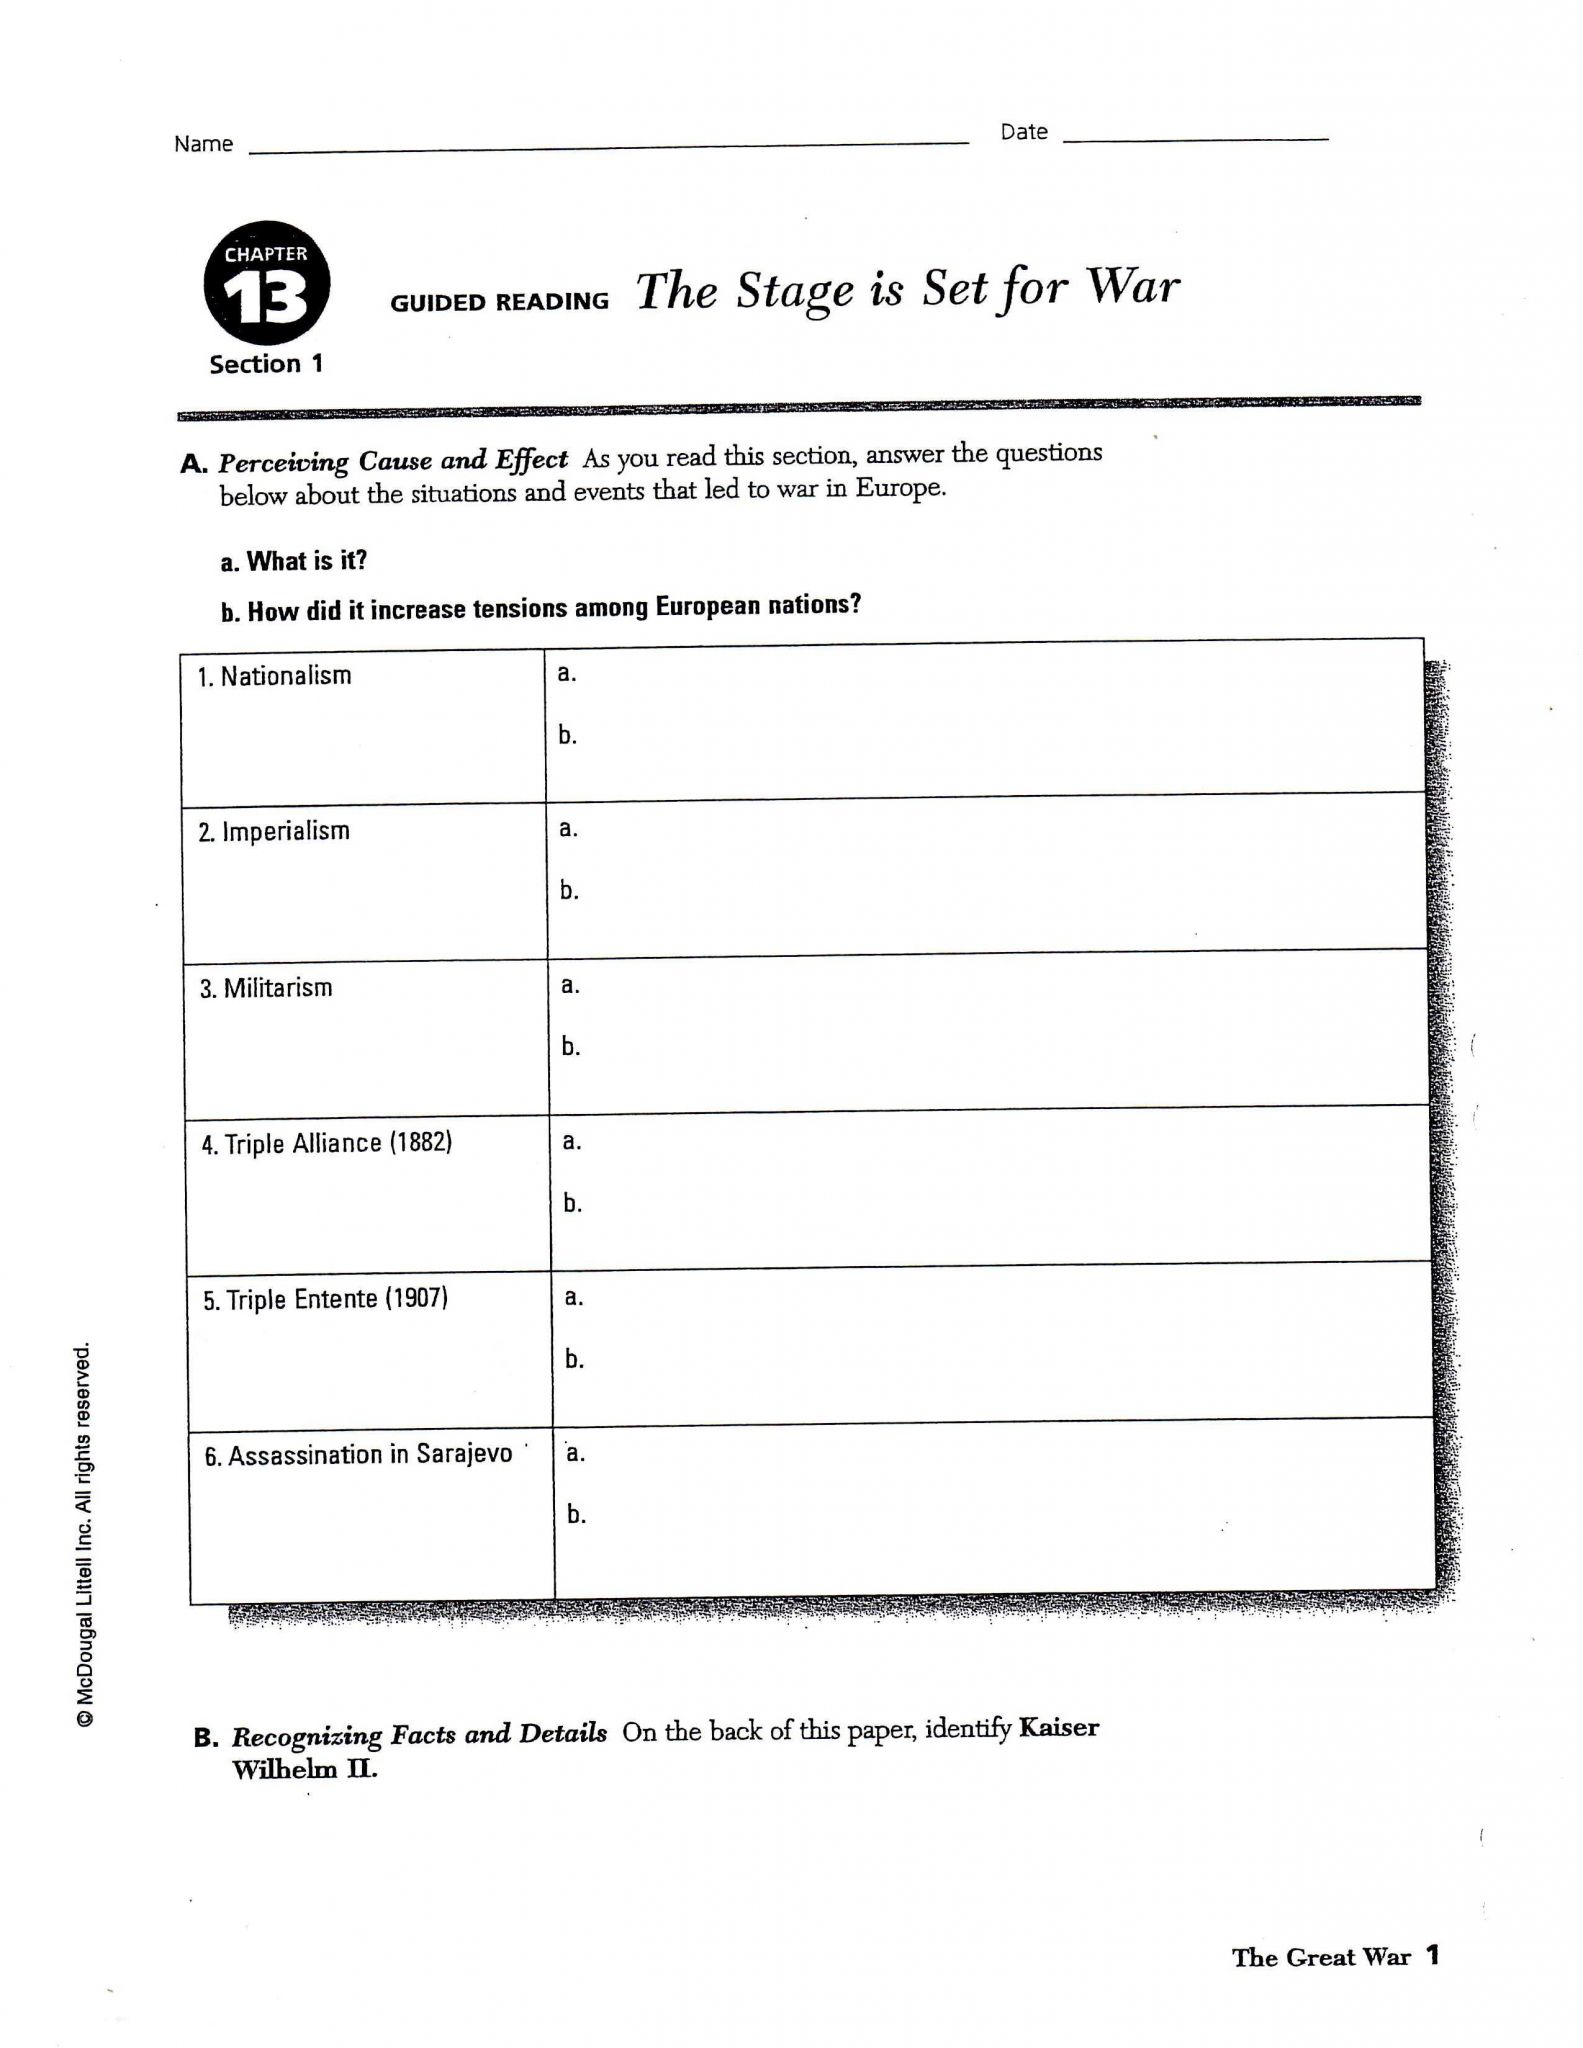 The Treaty Of Versailles Worksheet Answers Also Causes World War 1 Worksheet Causes World War Nationalism